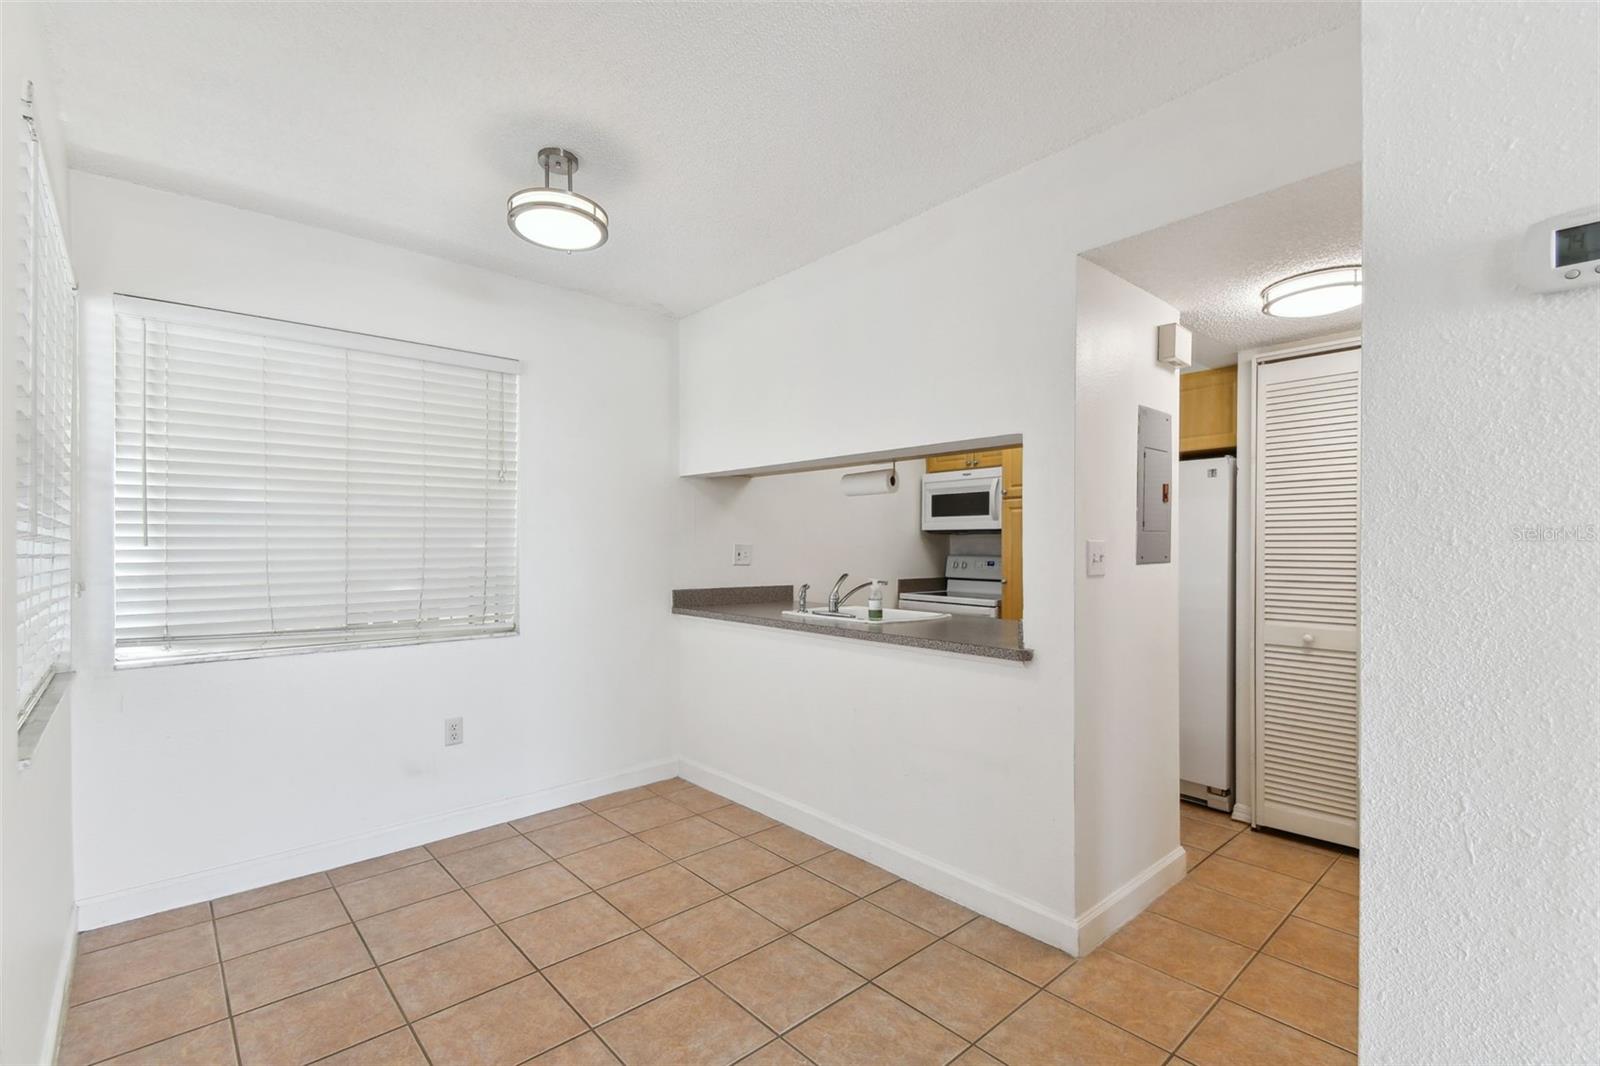 One bedroom condo, with laminate flooring and sliders for extra light.